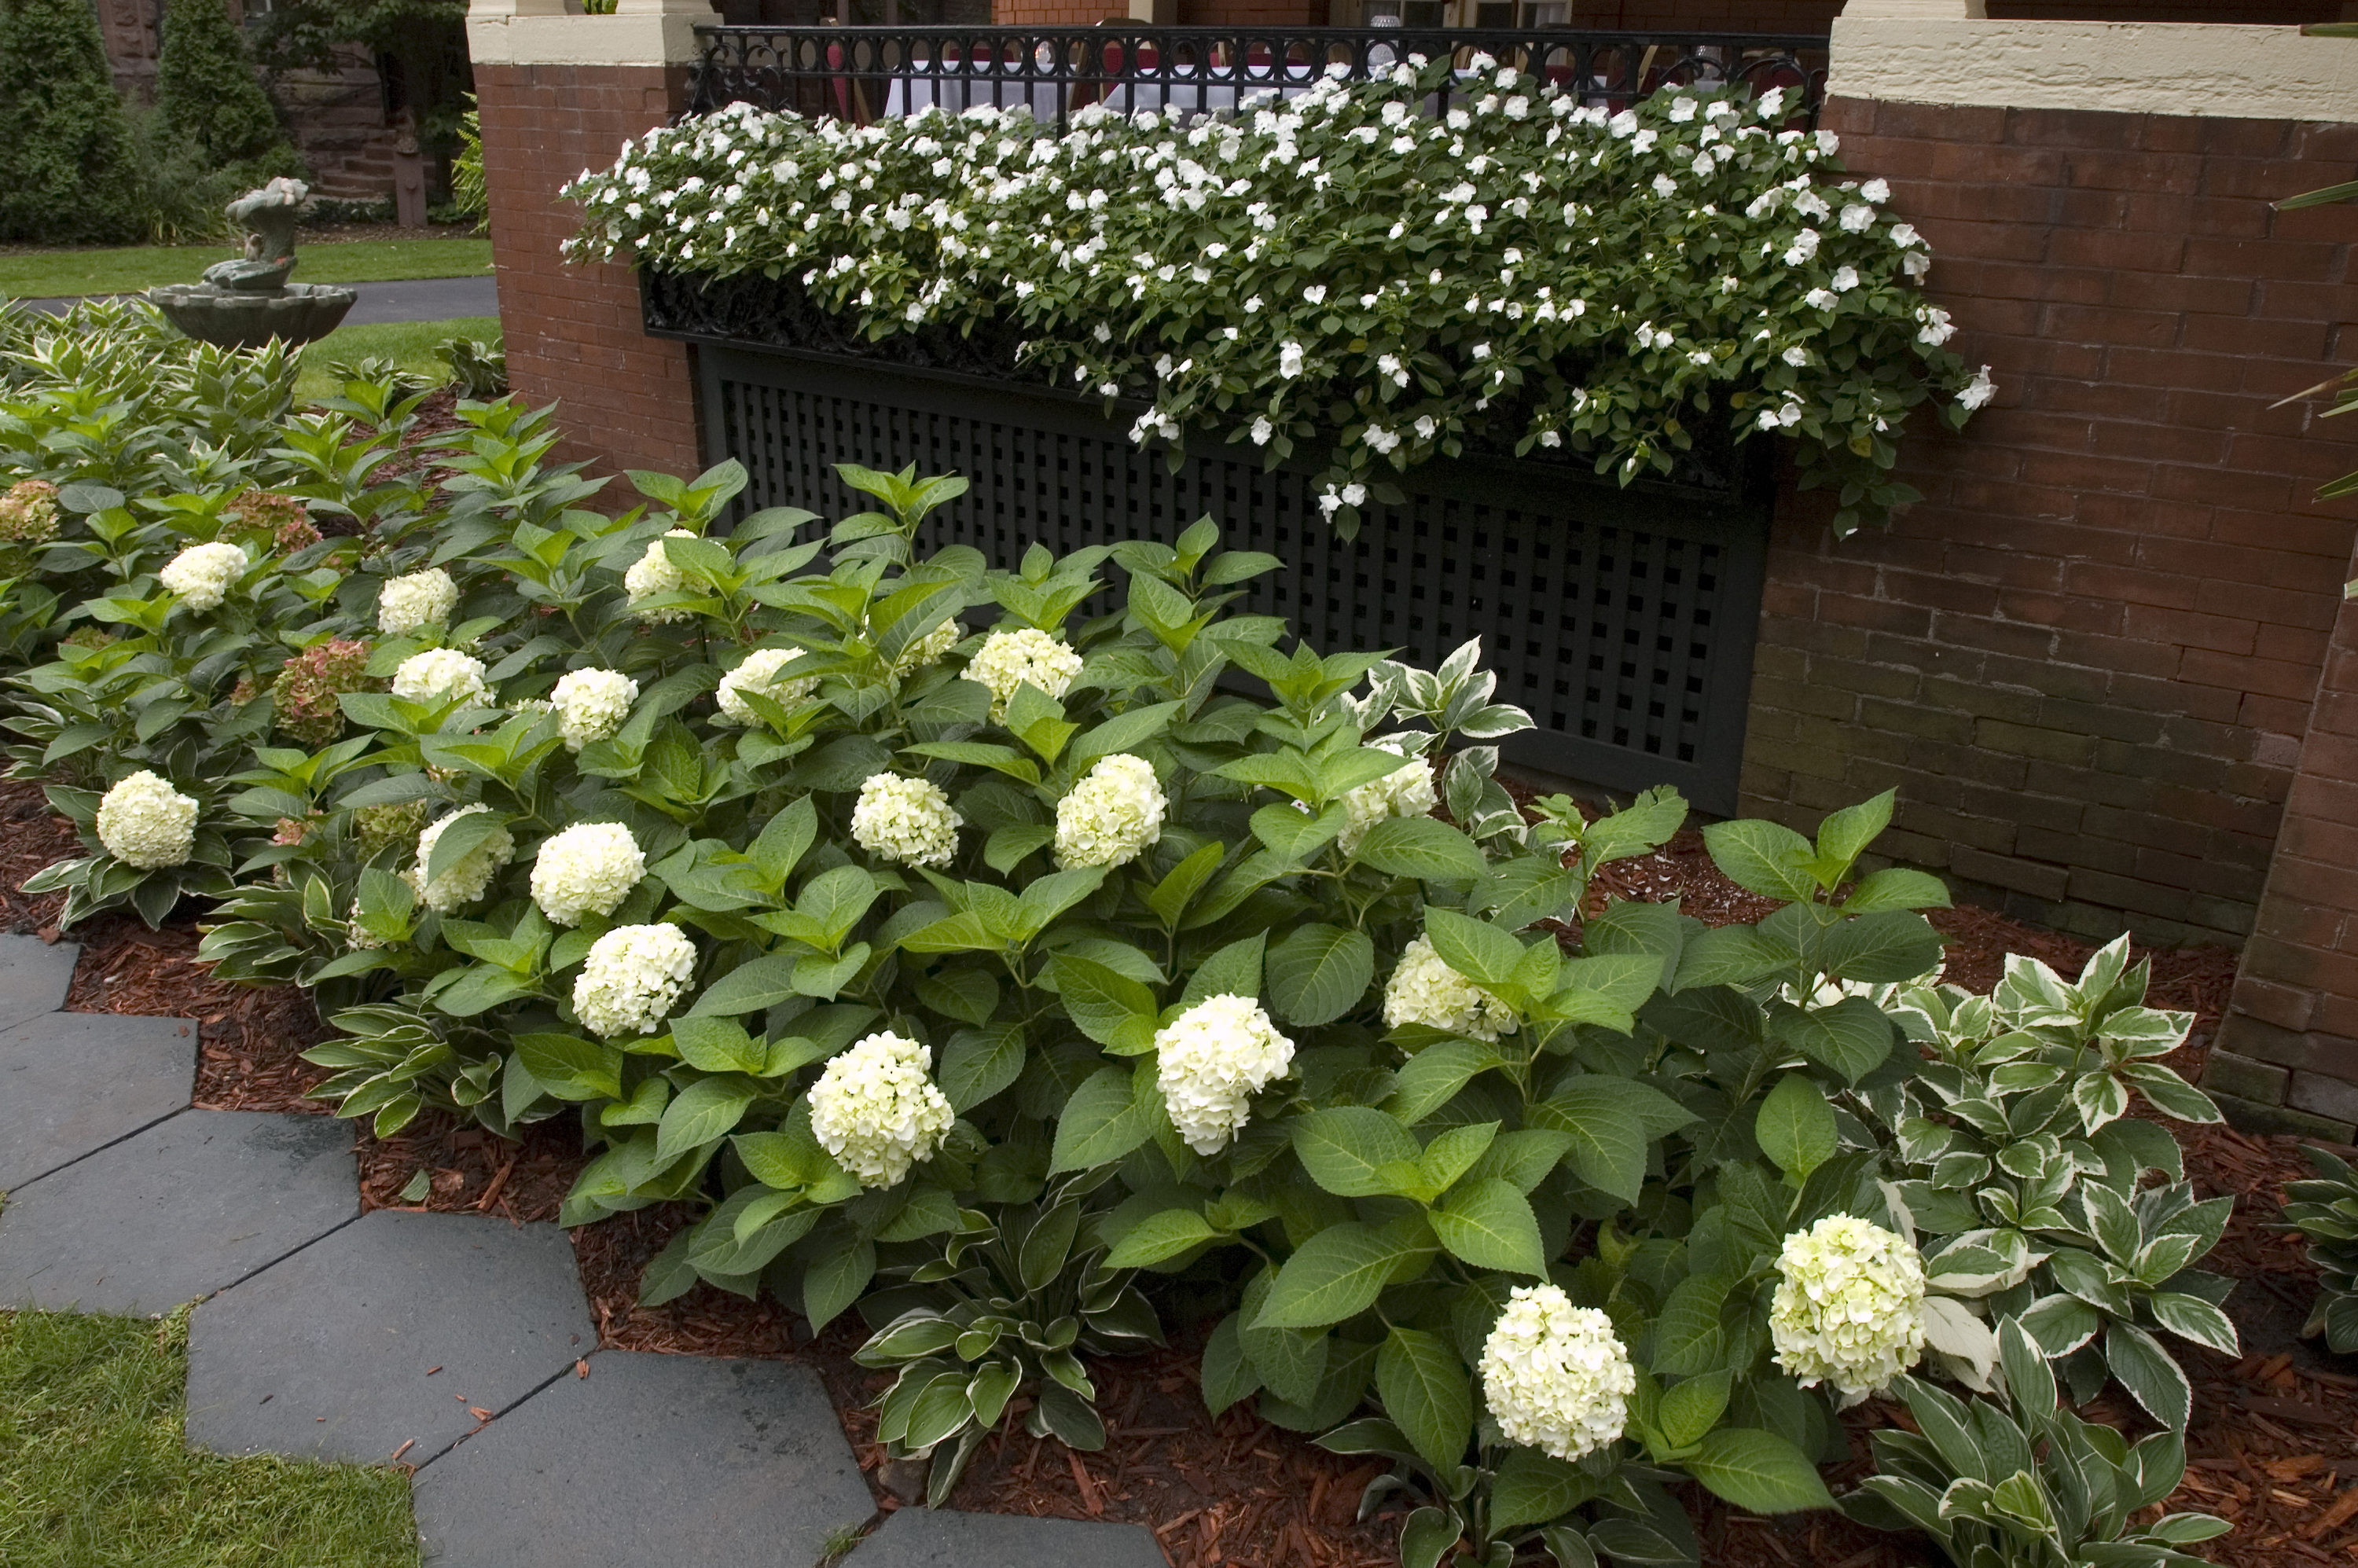 Blushing Bride® Hydrangea - 3 gallon container – Lots of Plants